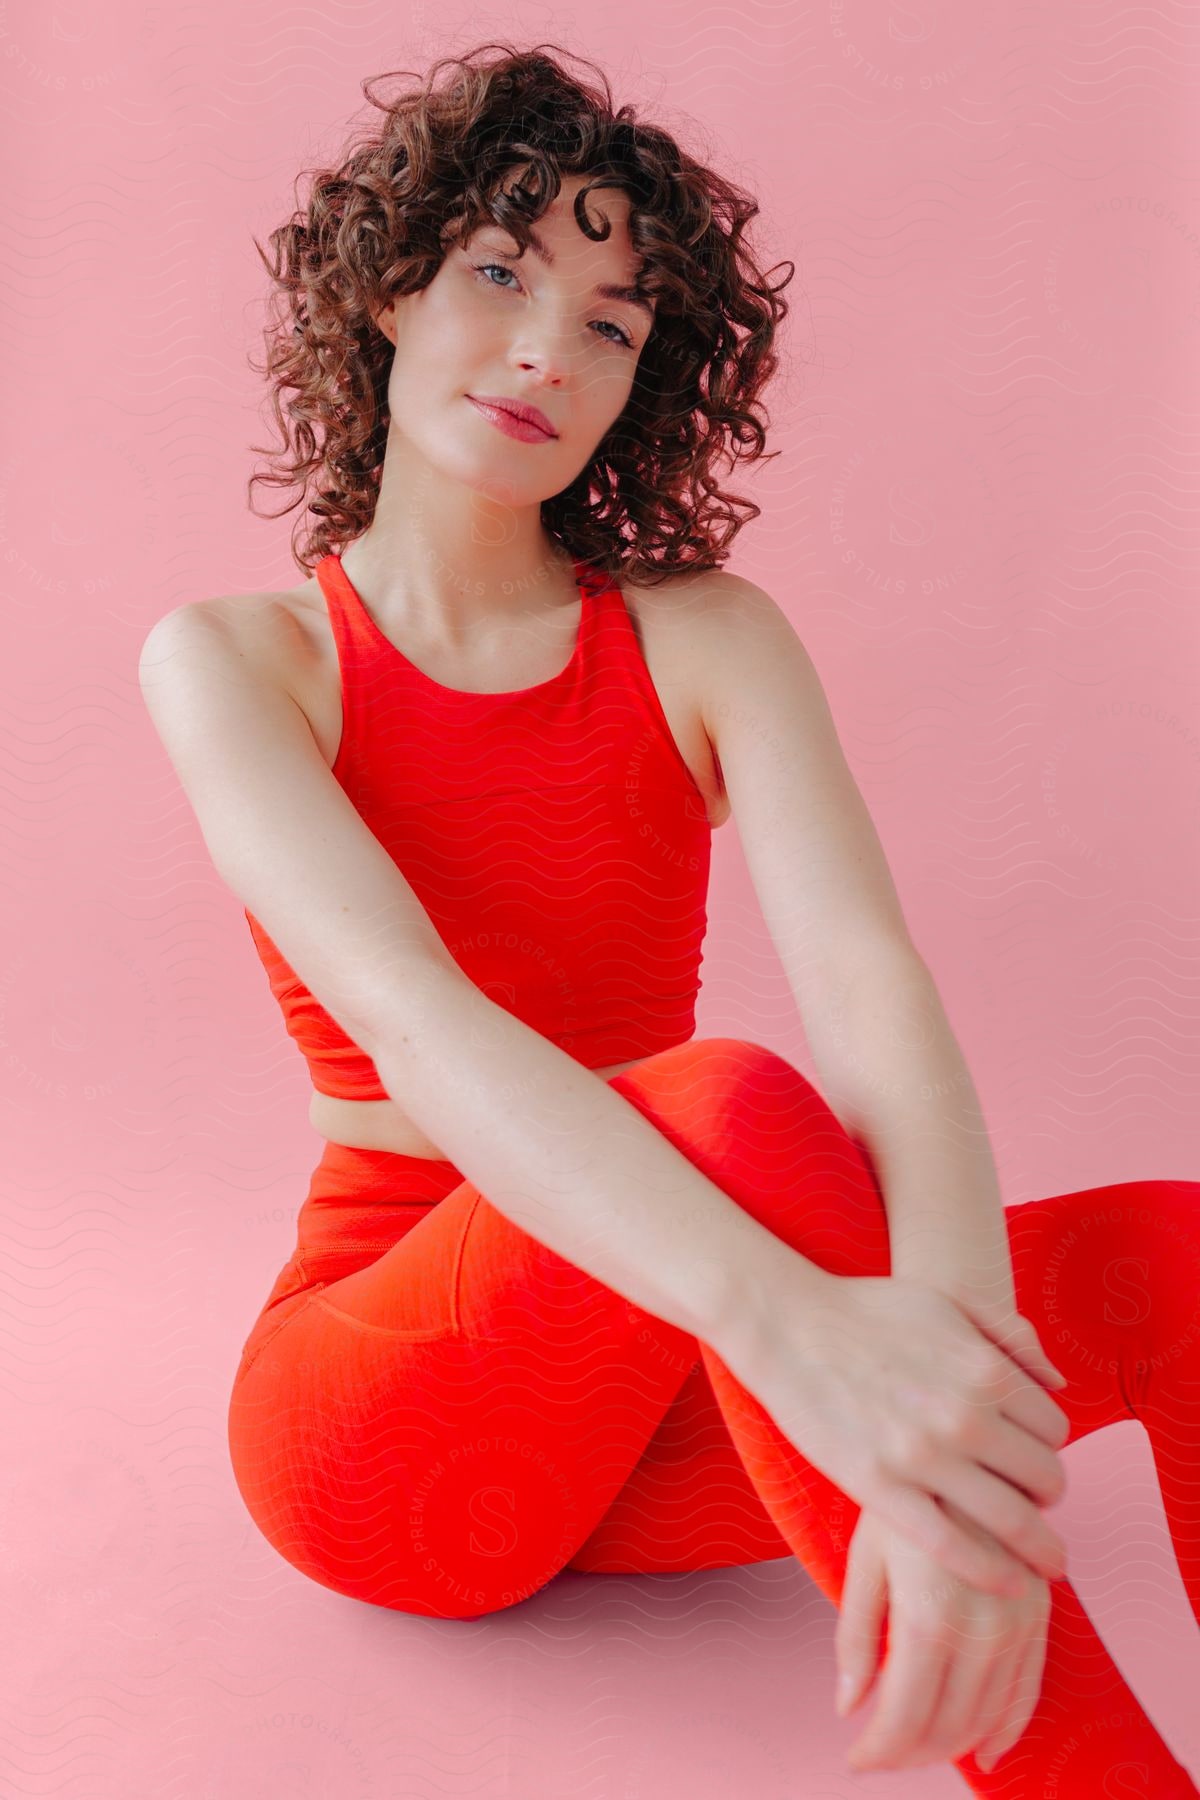 A woman in a red outfit is sitting posing in front of a pink background.